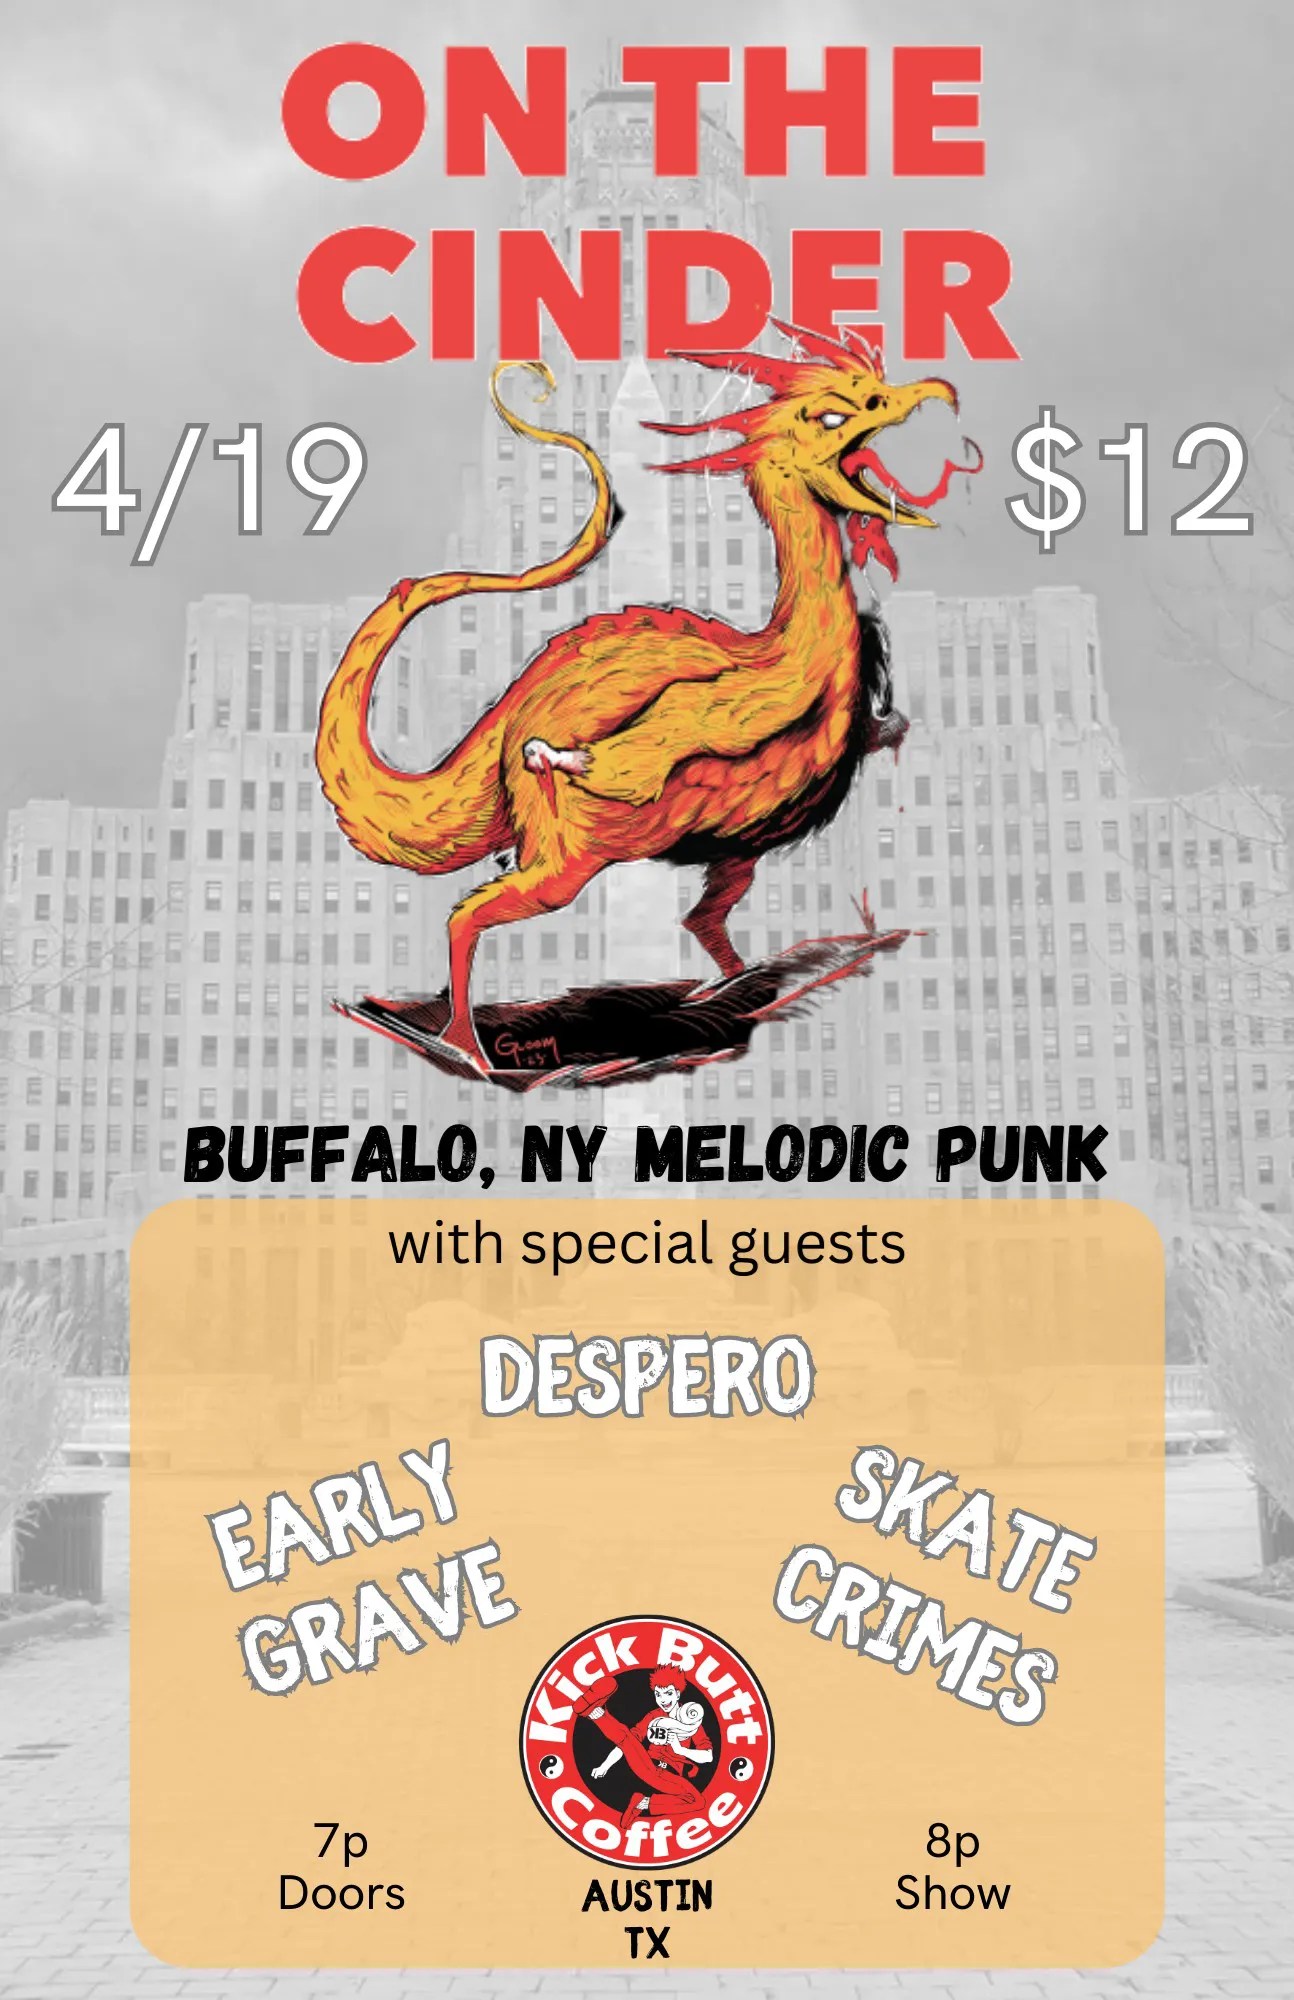 On The Cinder (NY), Despero, Early Grave, Skate Crimes